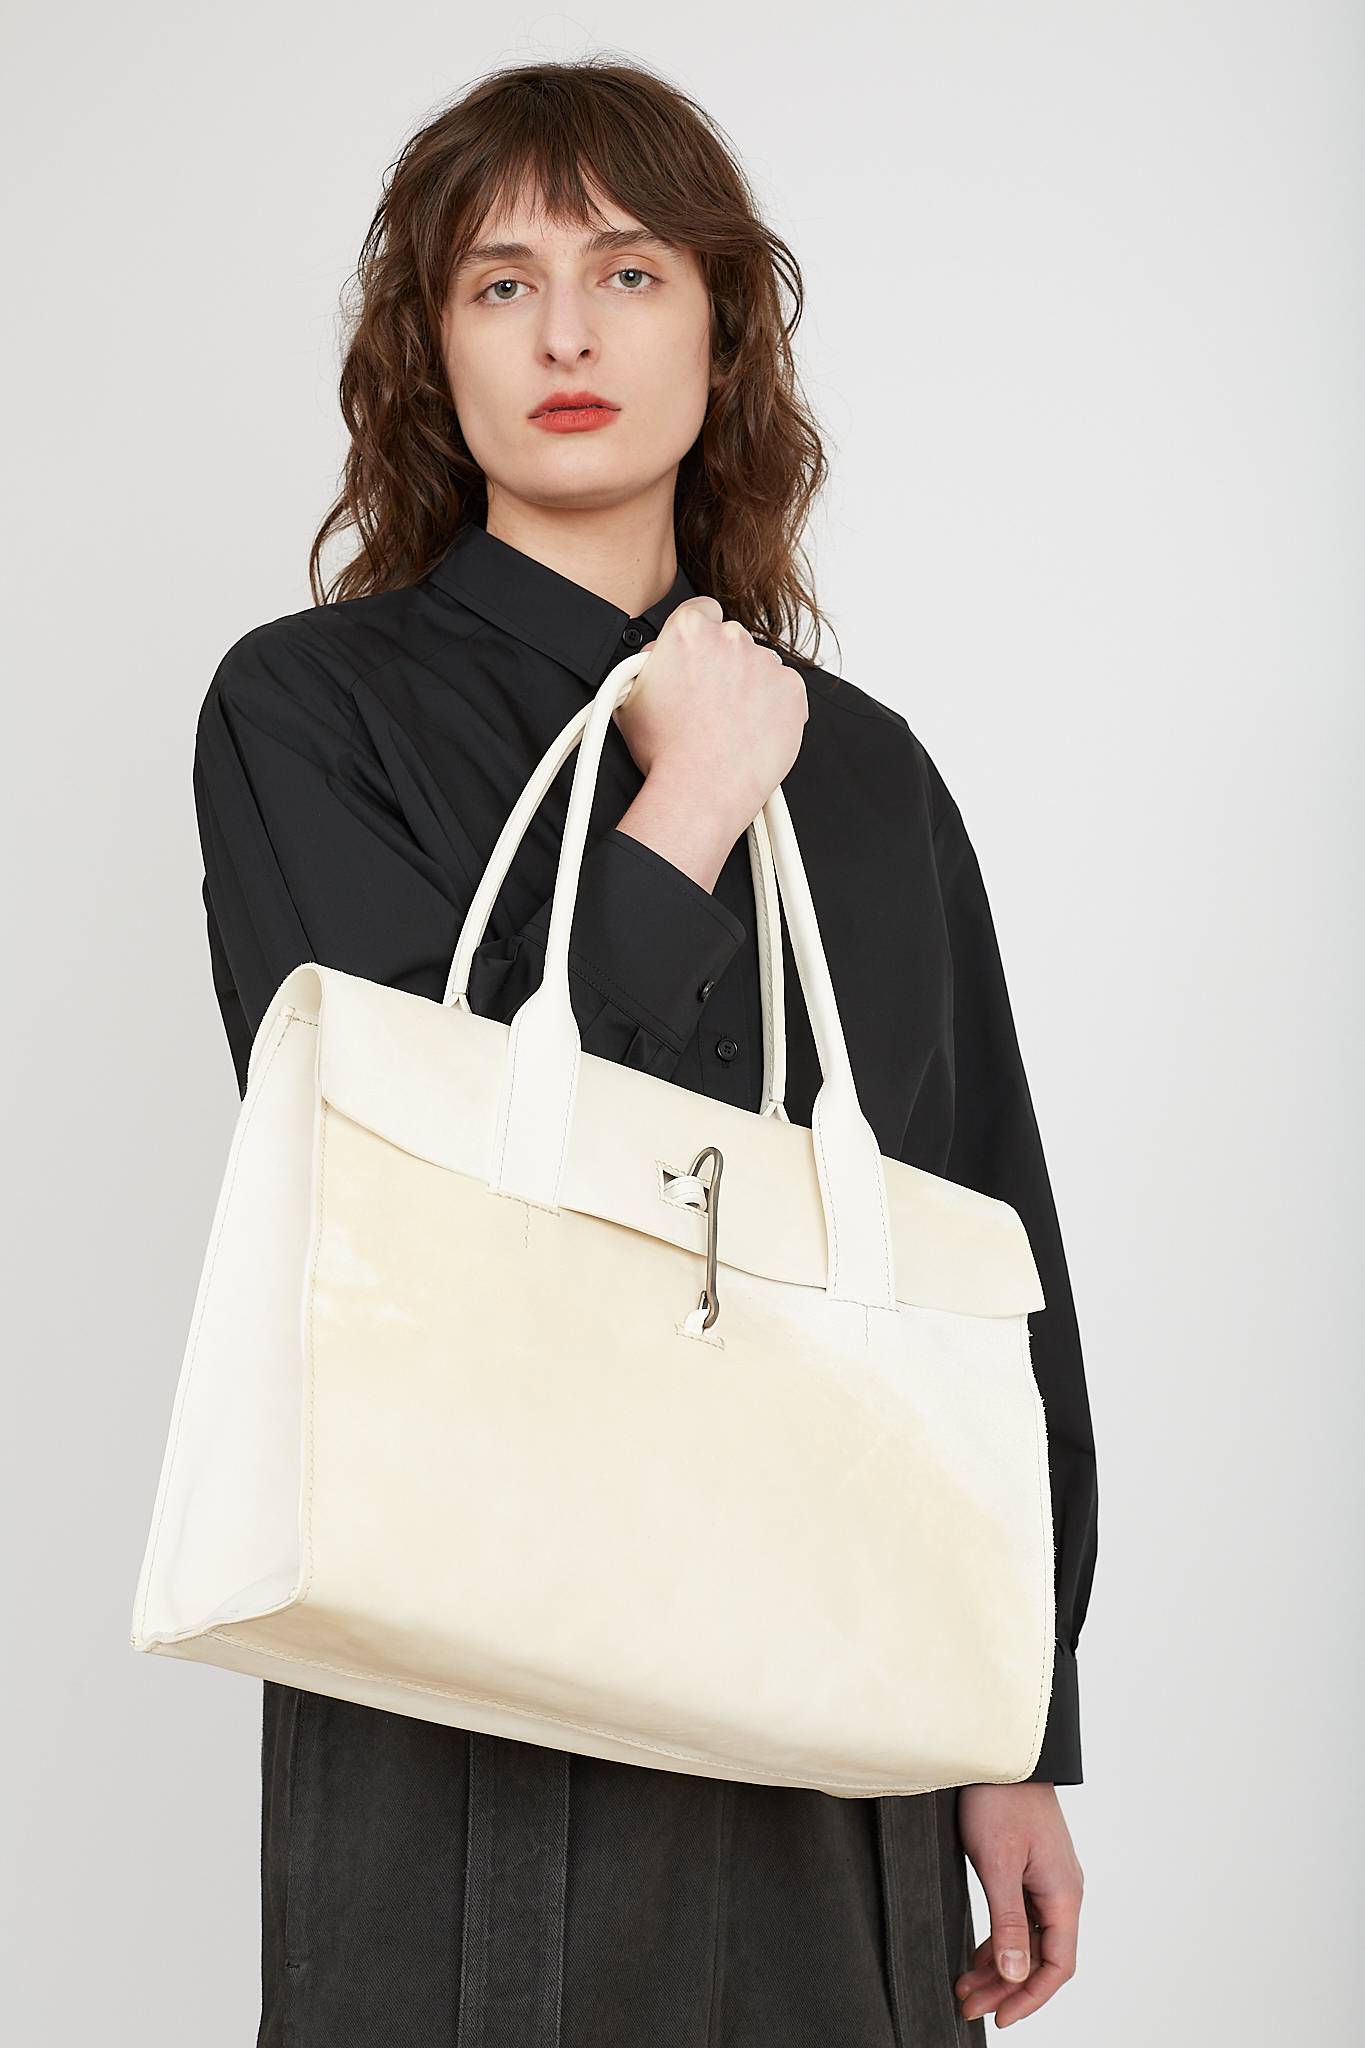 25% OFF BAGS + JEWELRY MOTHER'S DAY SALE